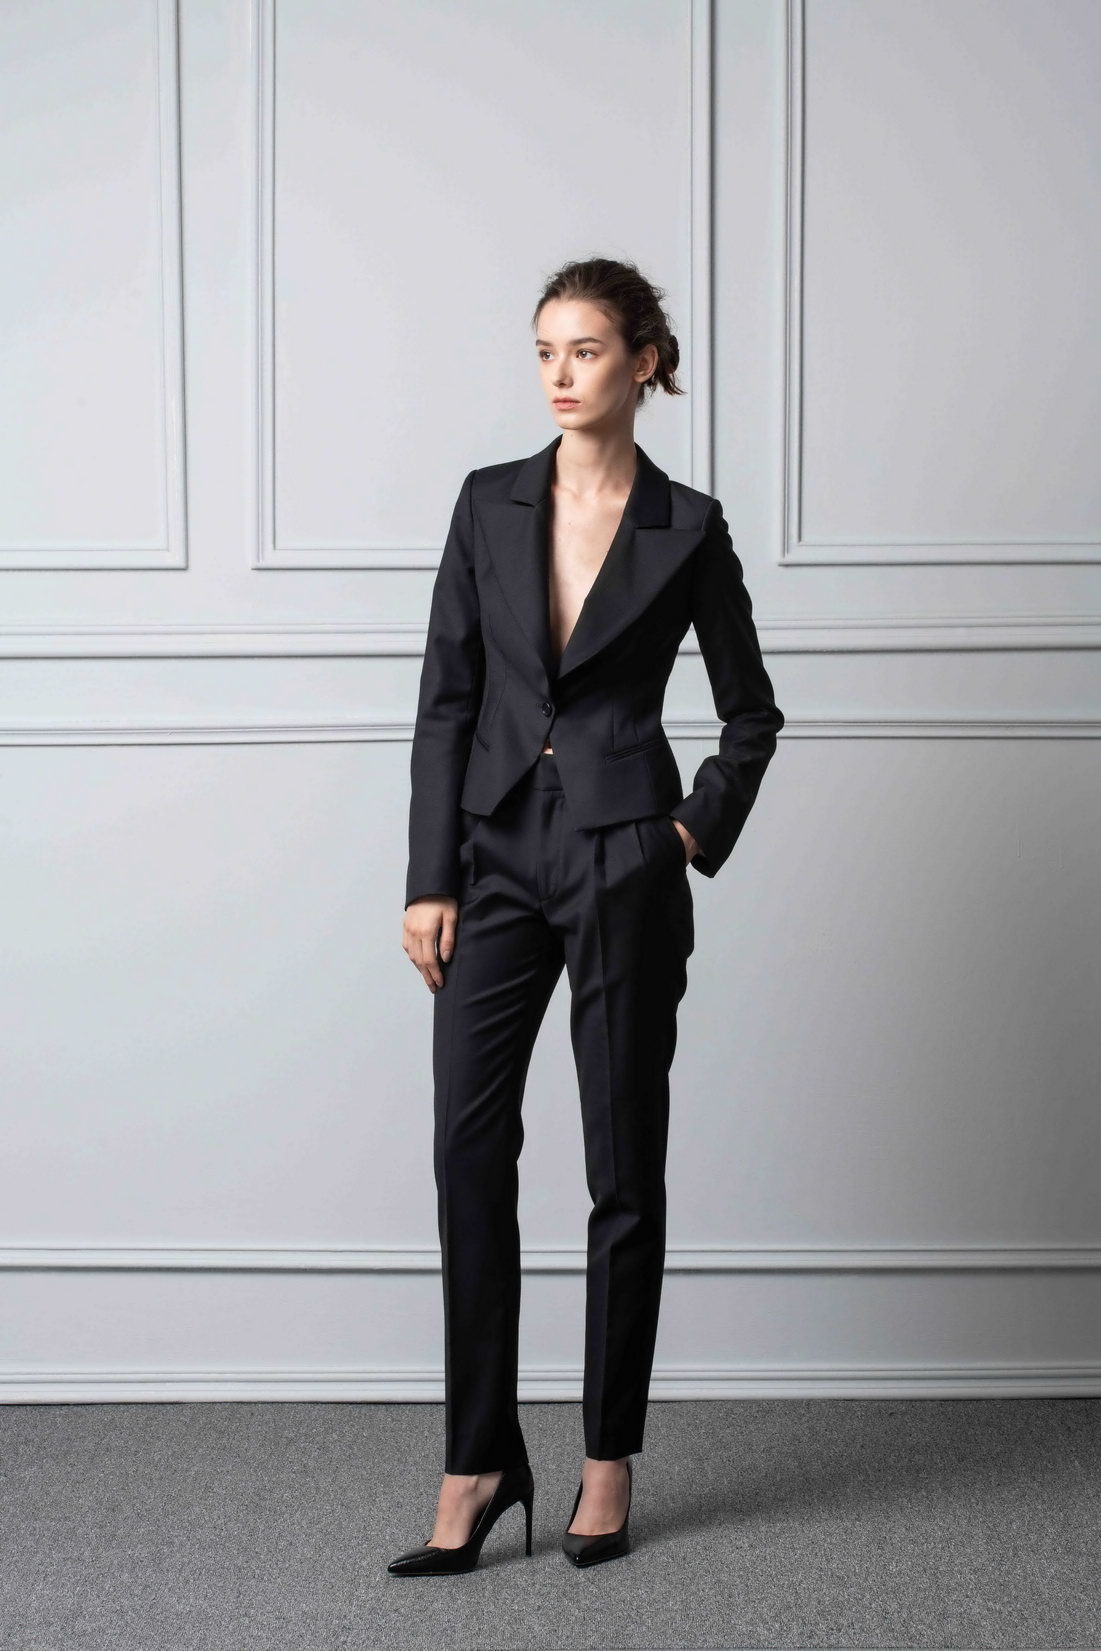 Women's Pant Suit, Custom Made-to-Measure Clothing Online